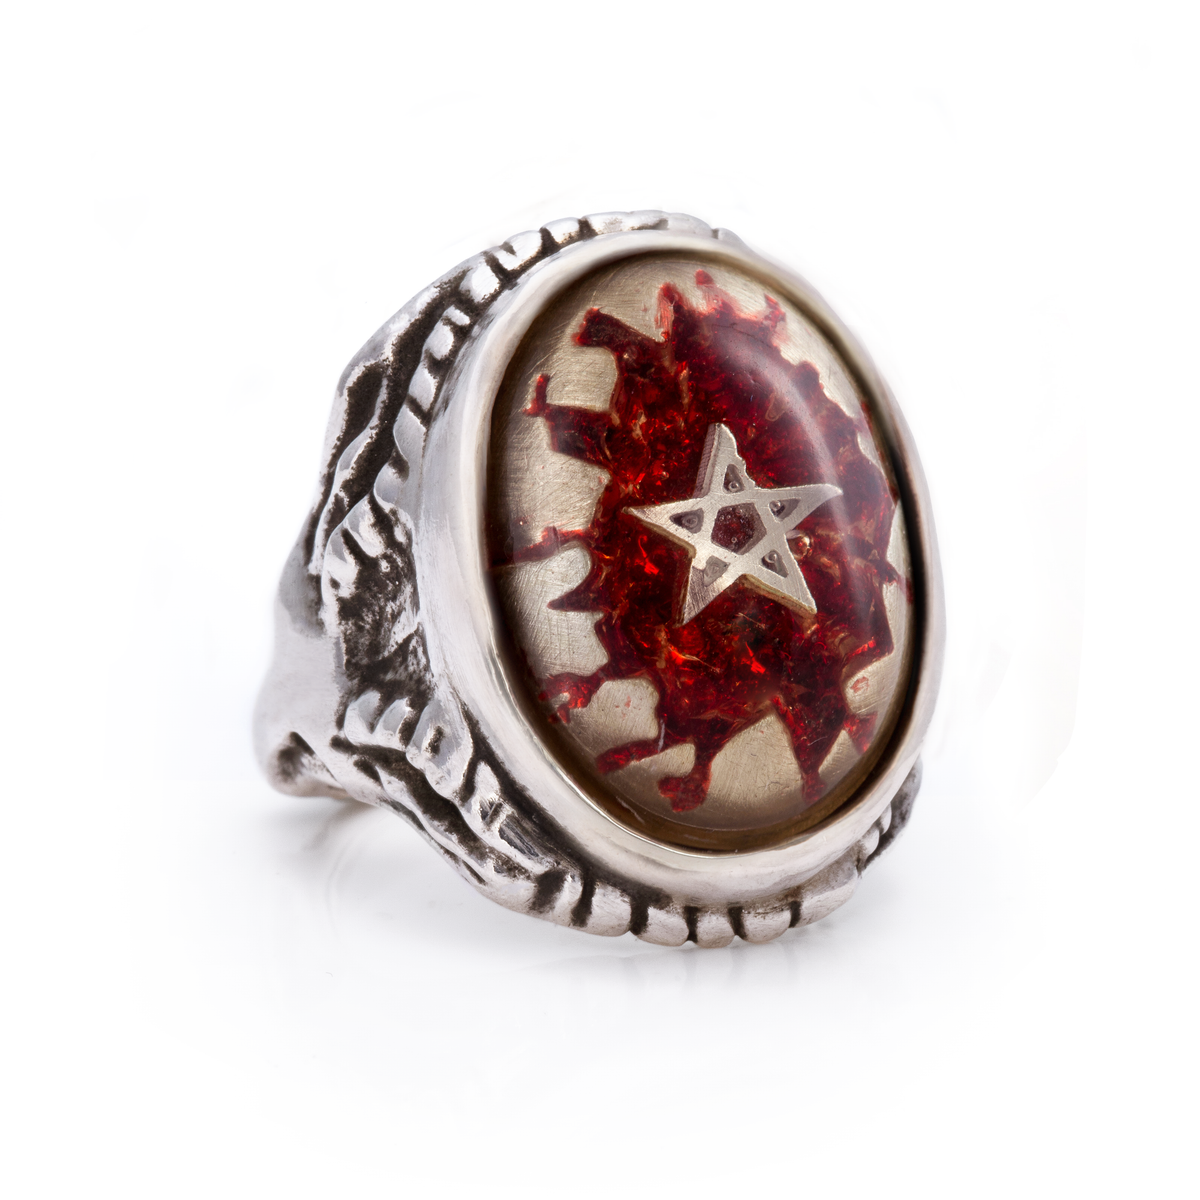 Cracked Egg Angel Heart Ring Japan 23 by Alex Streeter